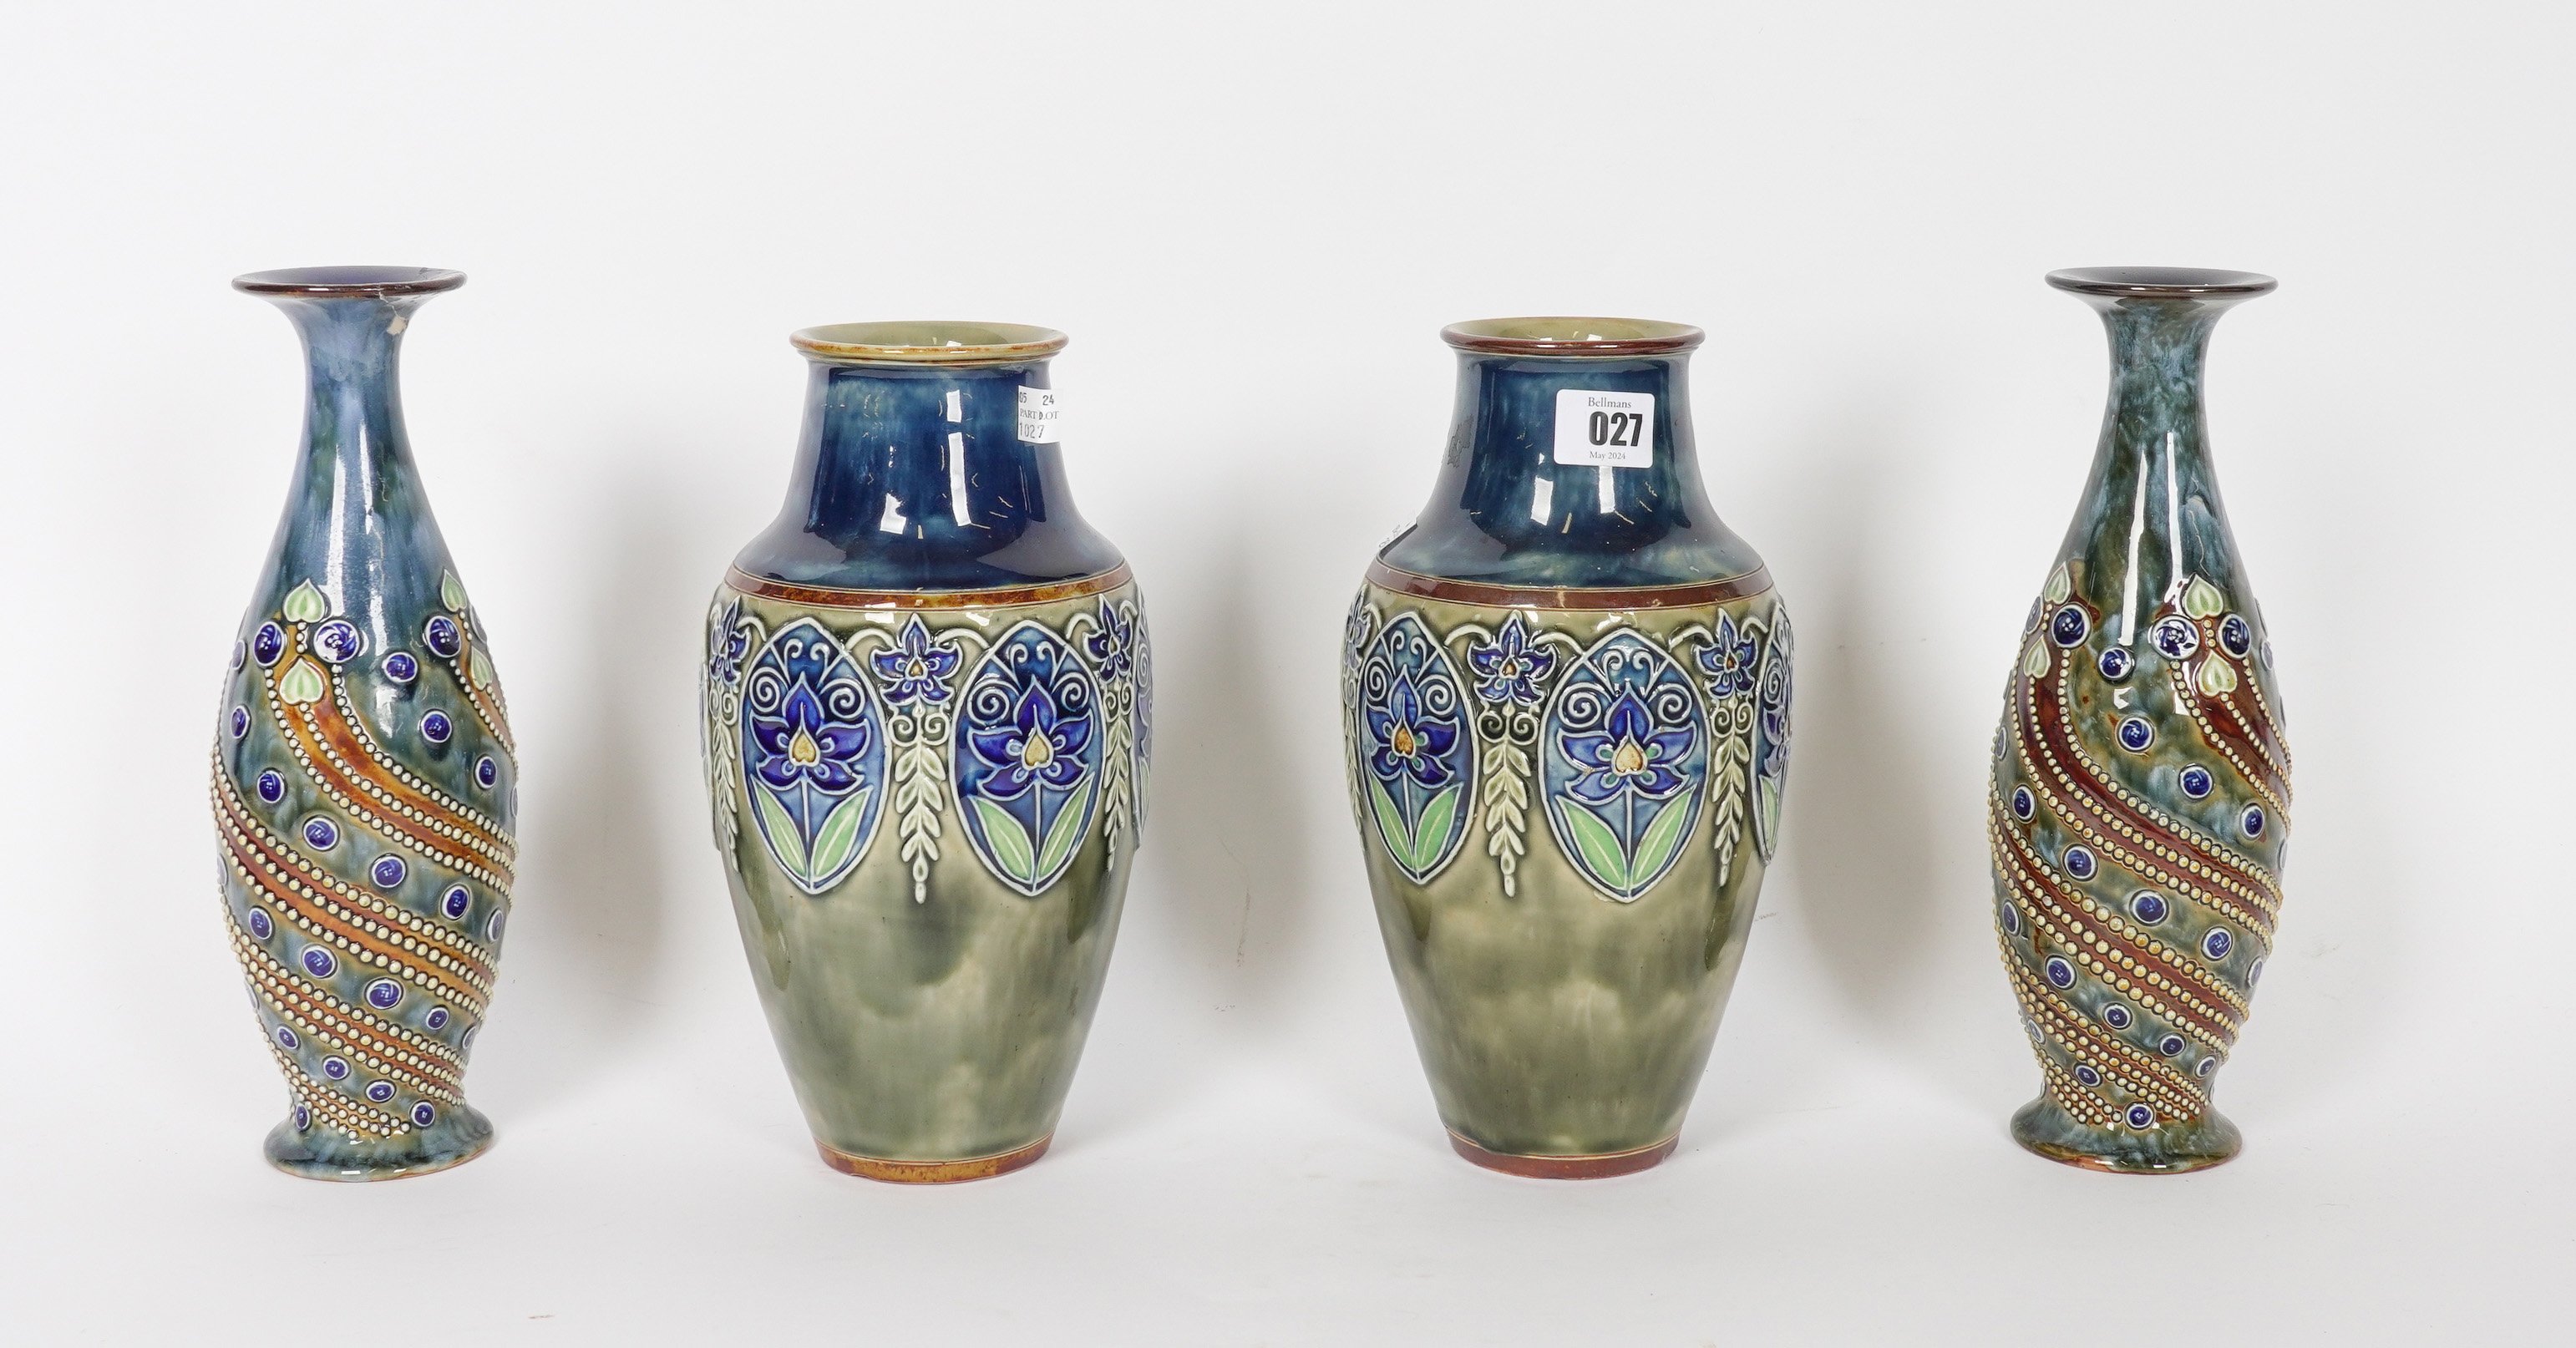 TWO PAIRS OF ROYAL DOULTON STONEWARE VASES (4) - Image 2 of 5